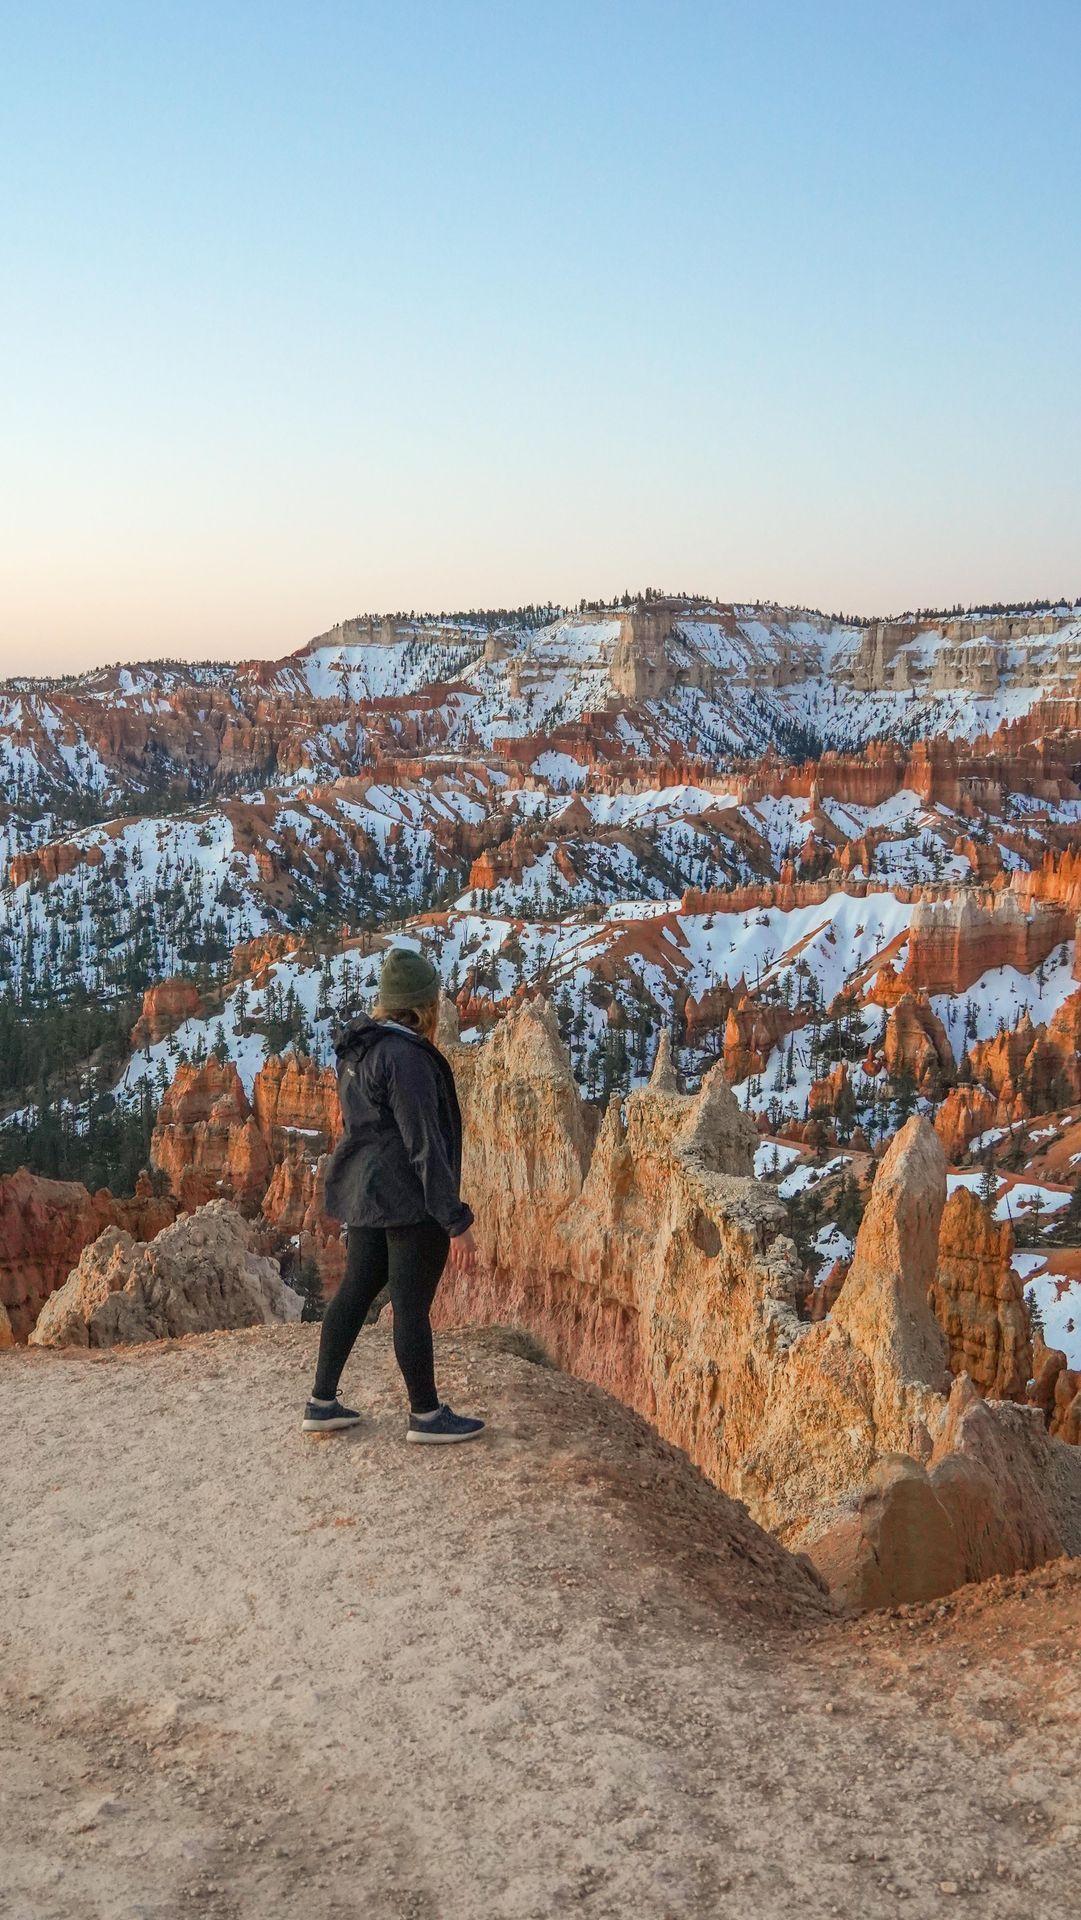 Have you explored Bryce Canyon National Park?